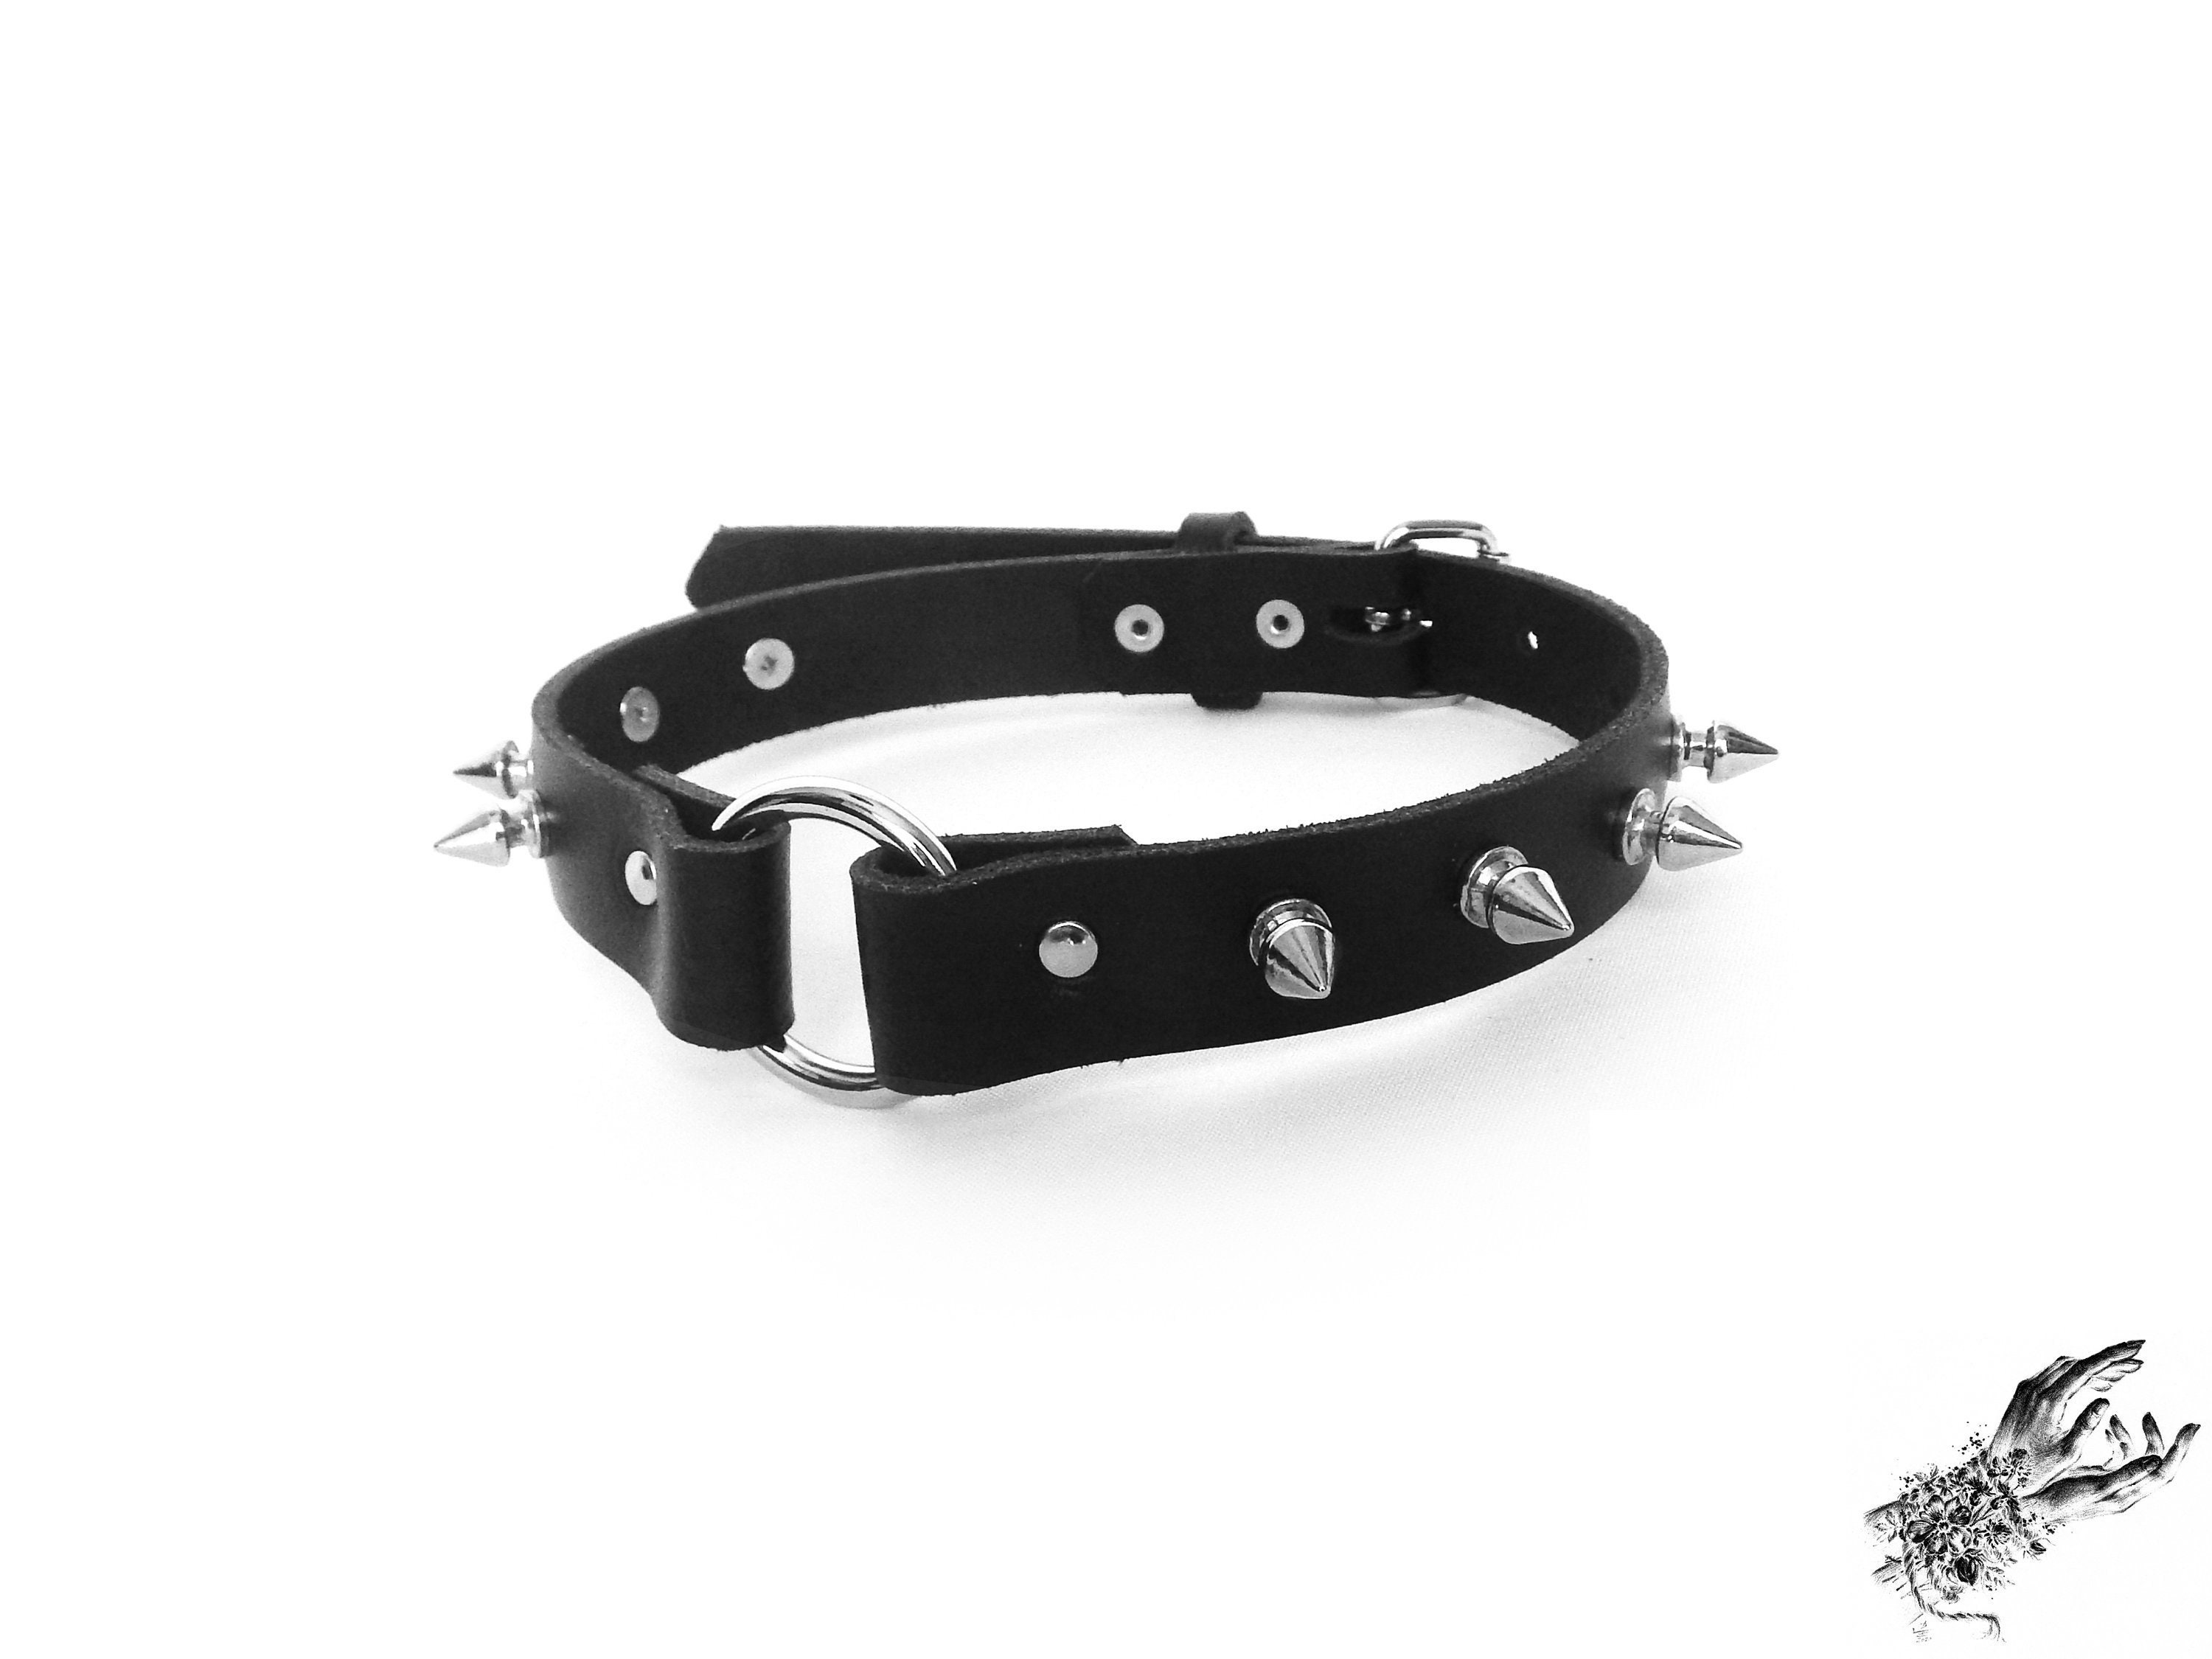 18+/GOTHIC/PUNK 2 STYLES BLACK Real Leather D-RING CHOKER 18mm Wide 